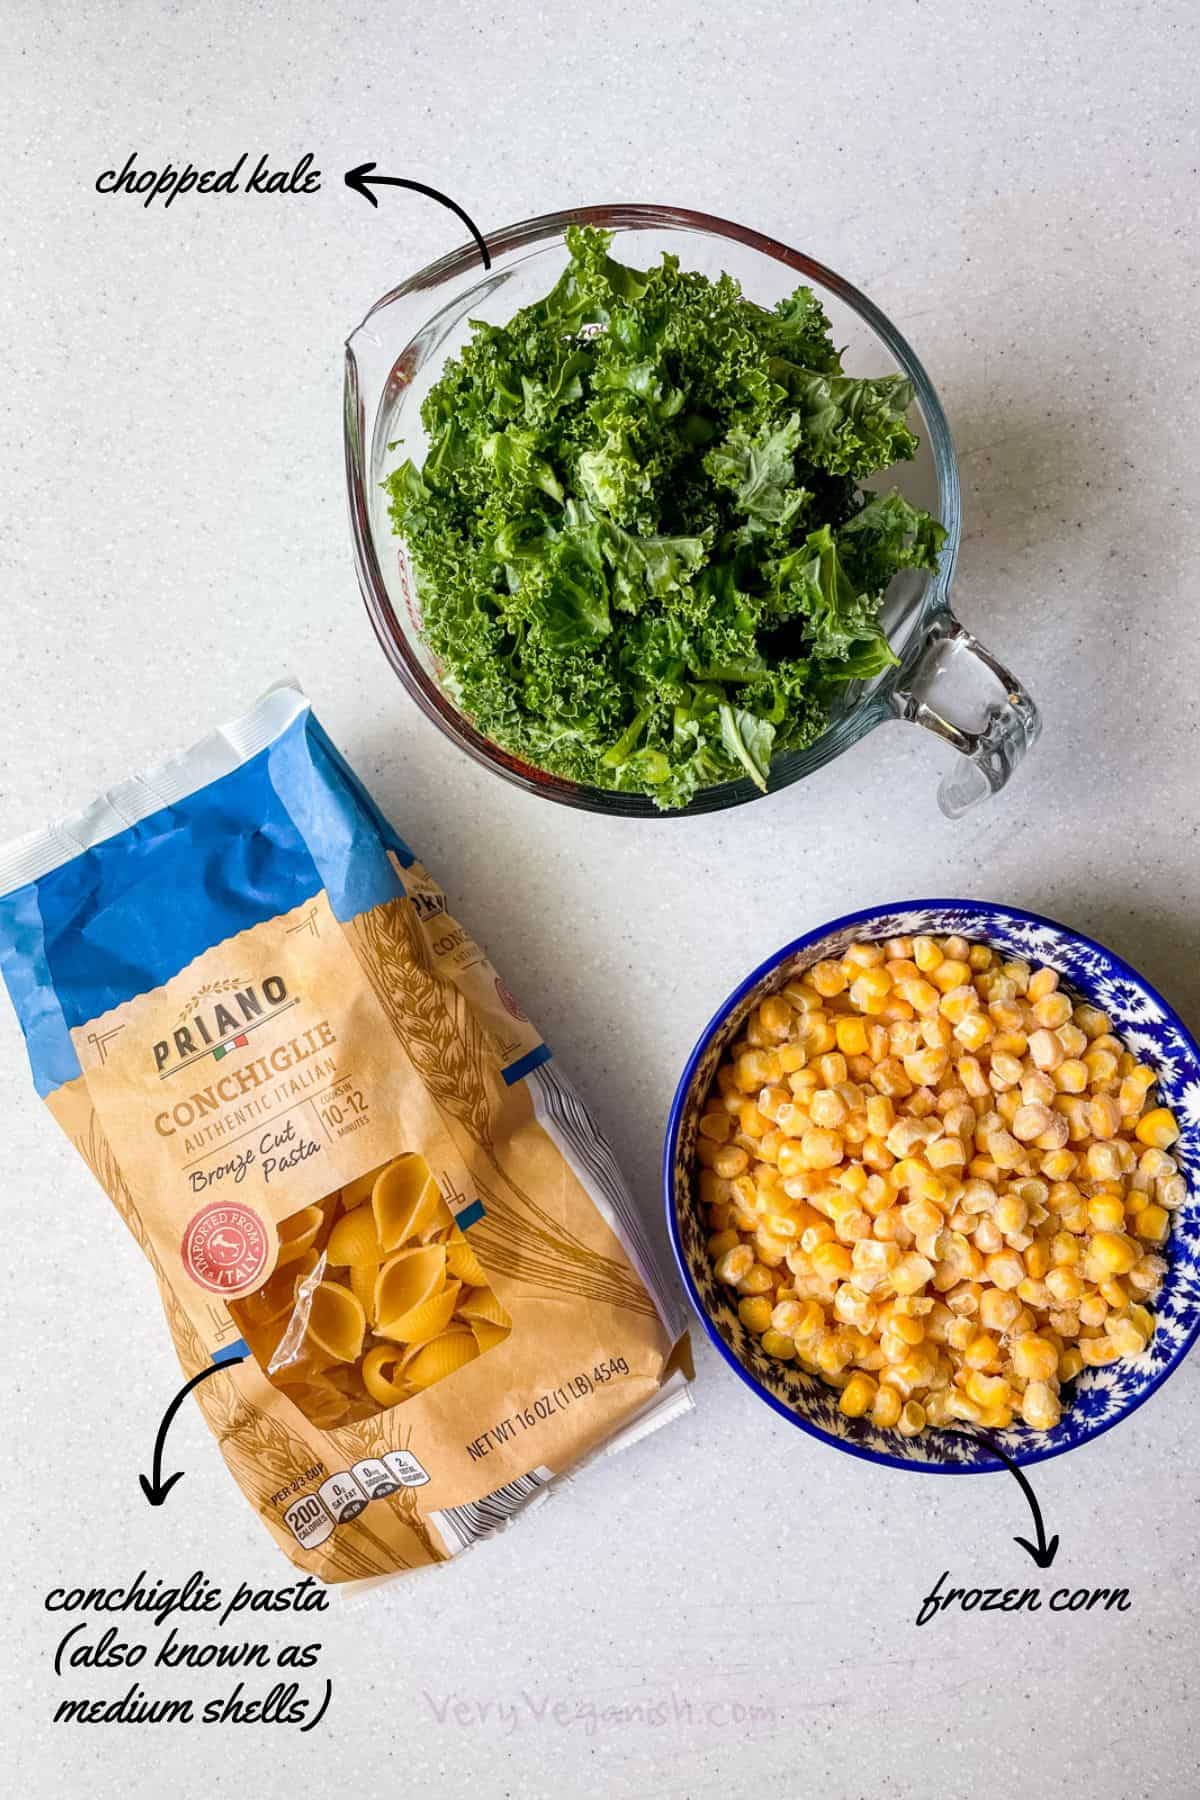 ingredients on counter: conchiglie medium shells pasta, chopped curly kale and frozen corn kernels